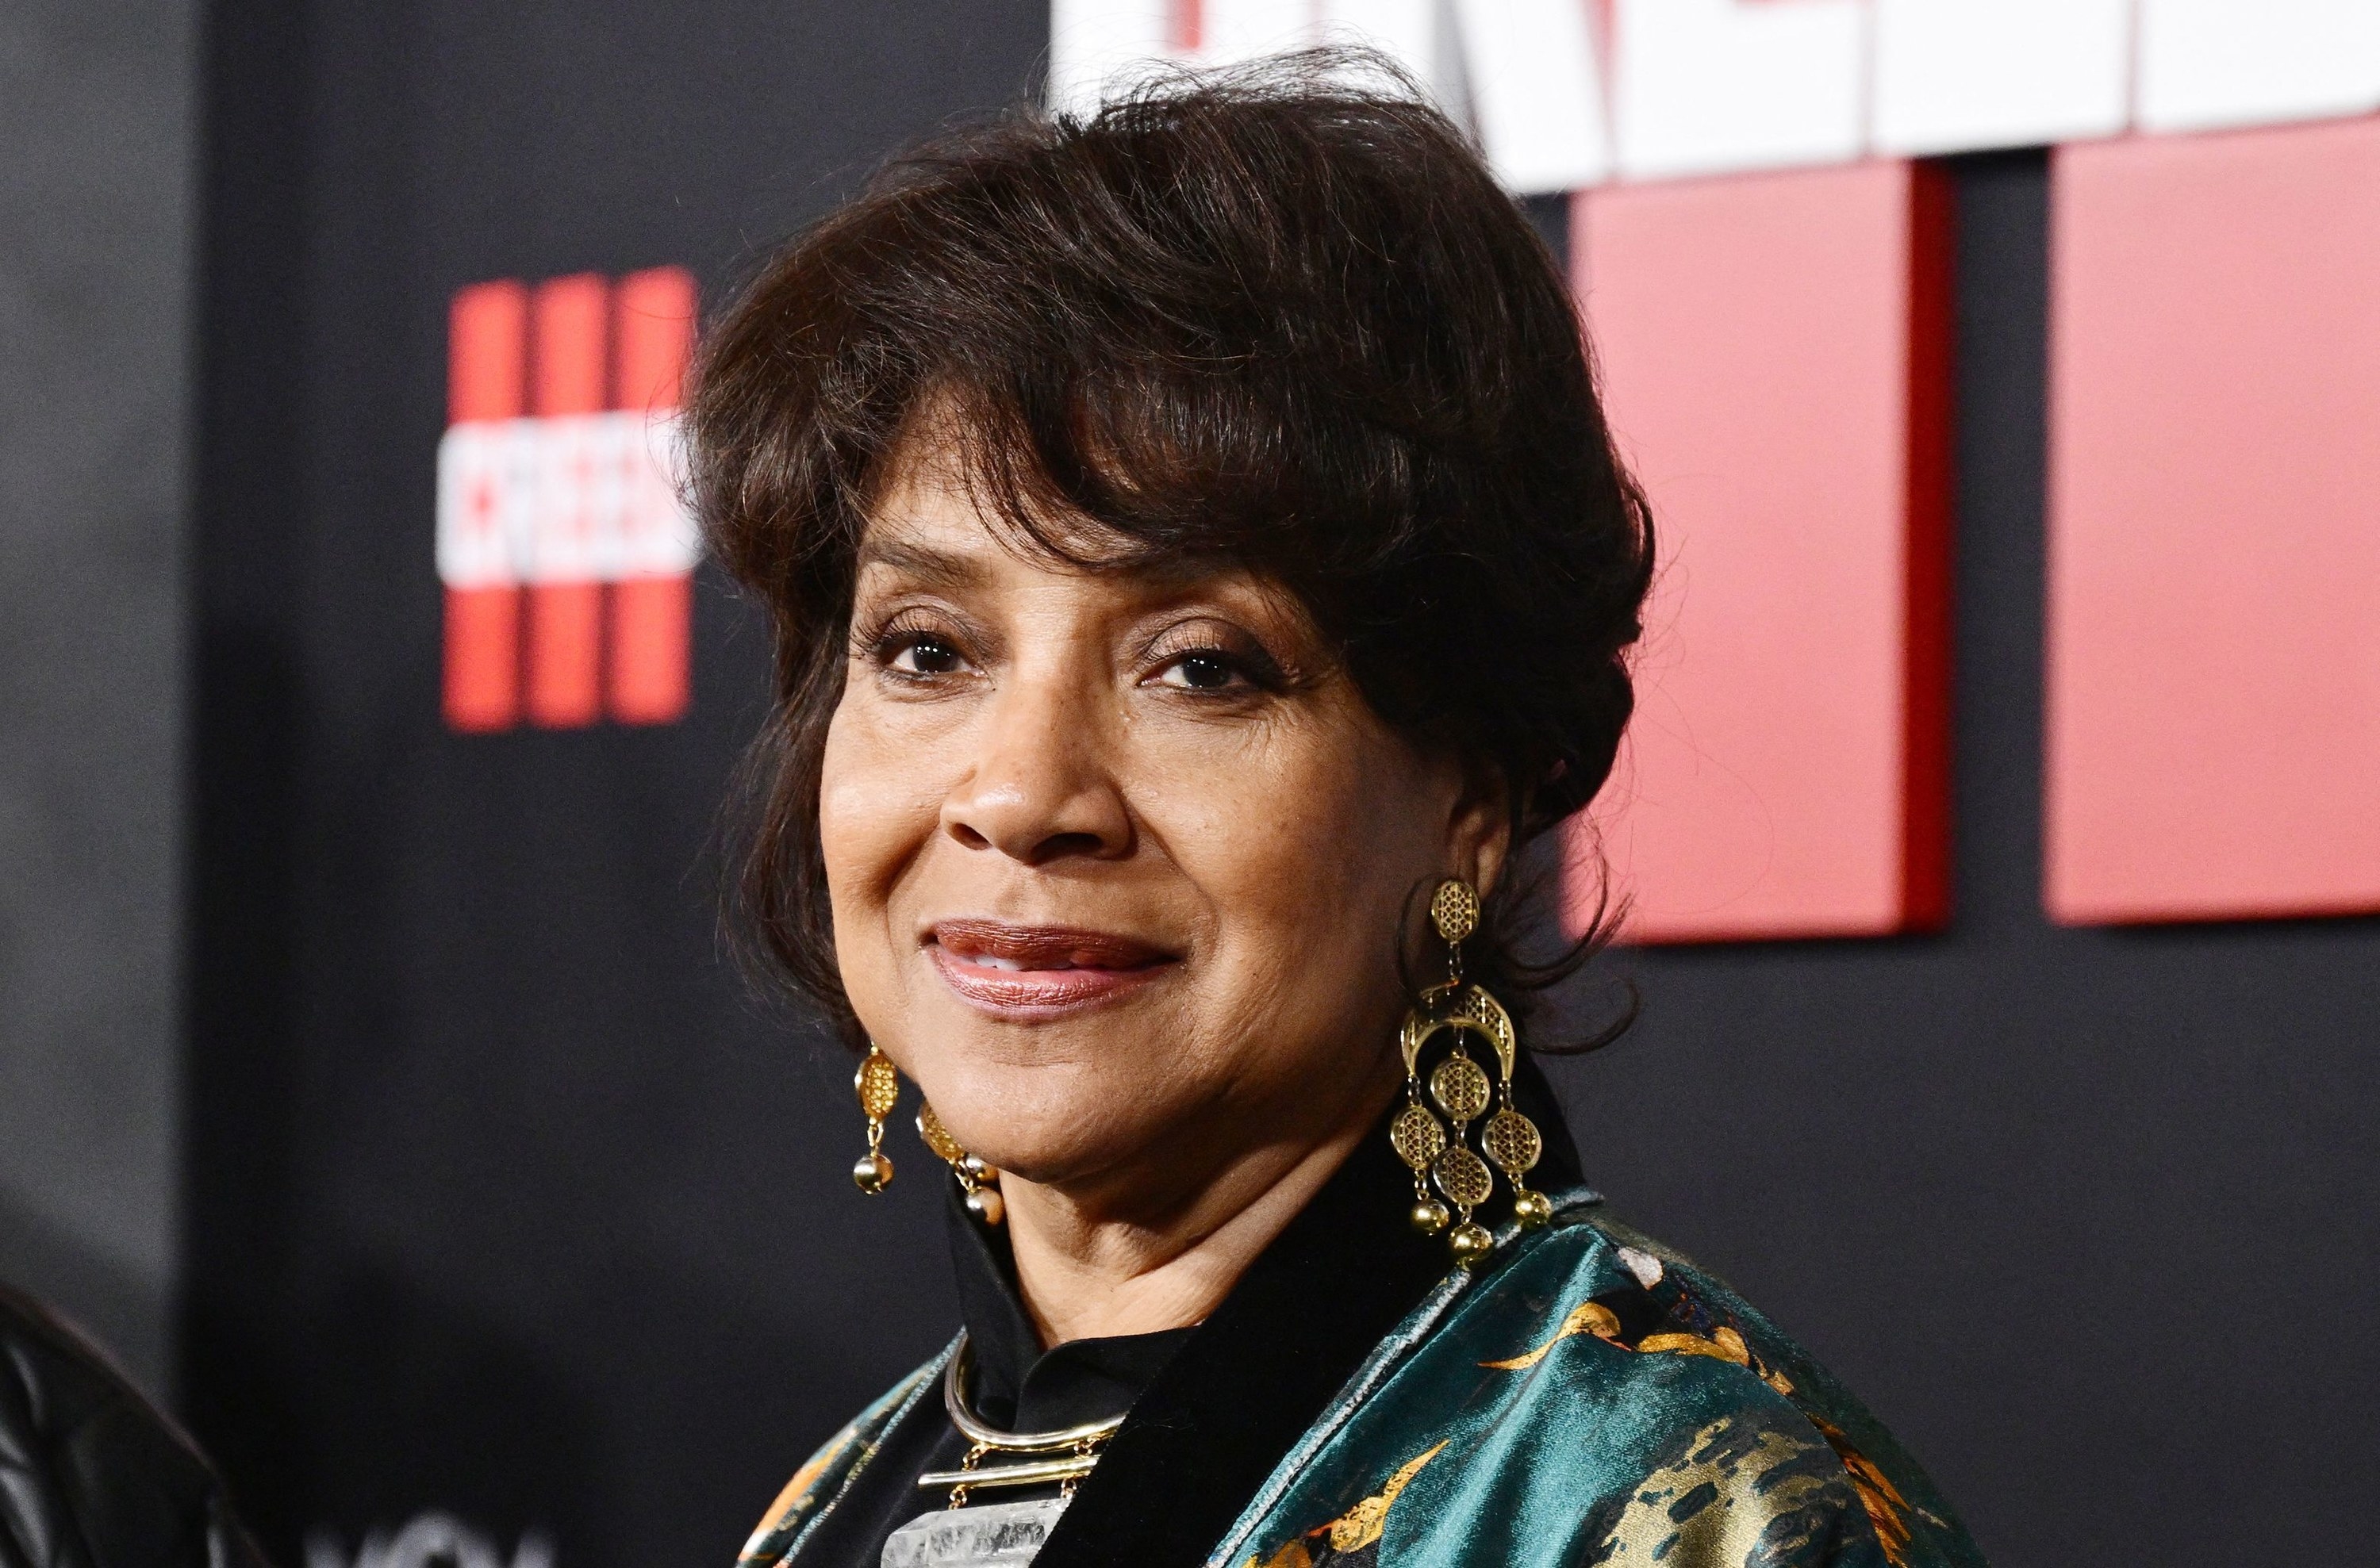 Phylicia Rashad on the red carpet